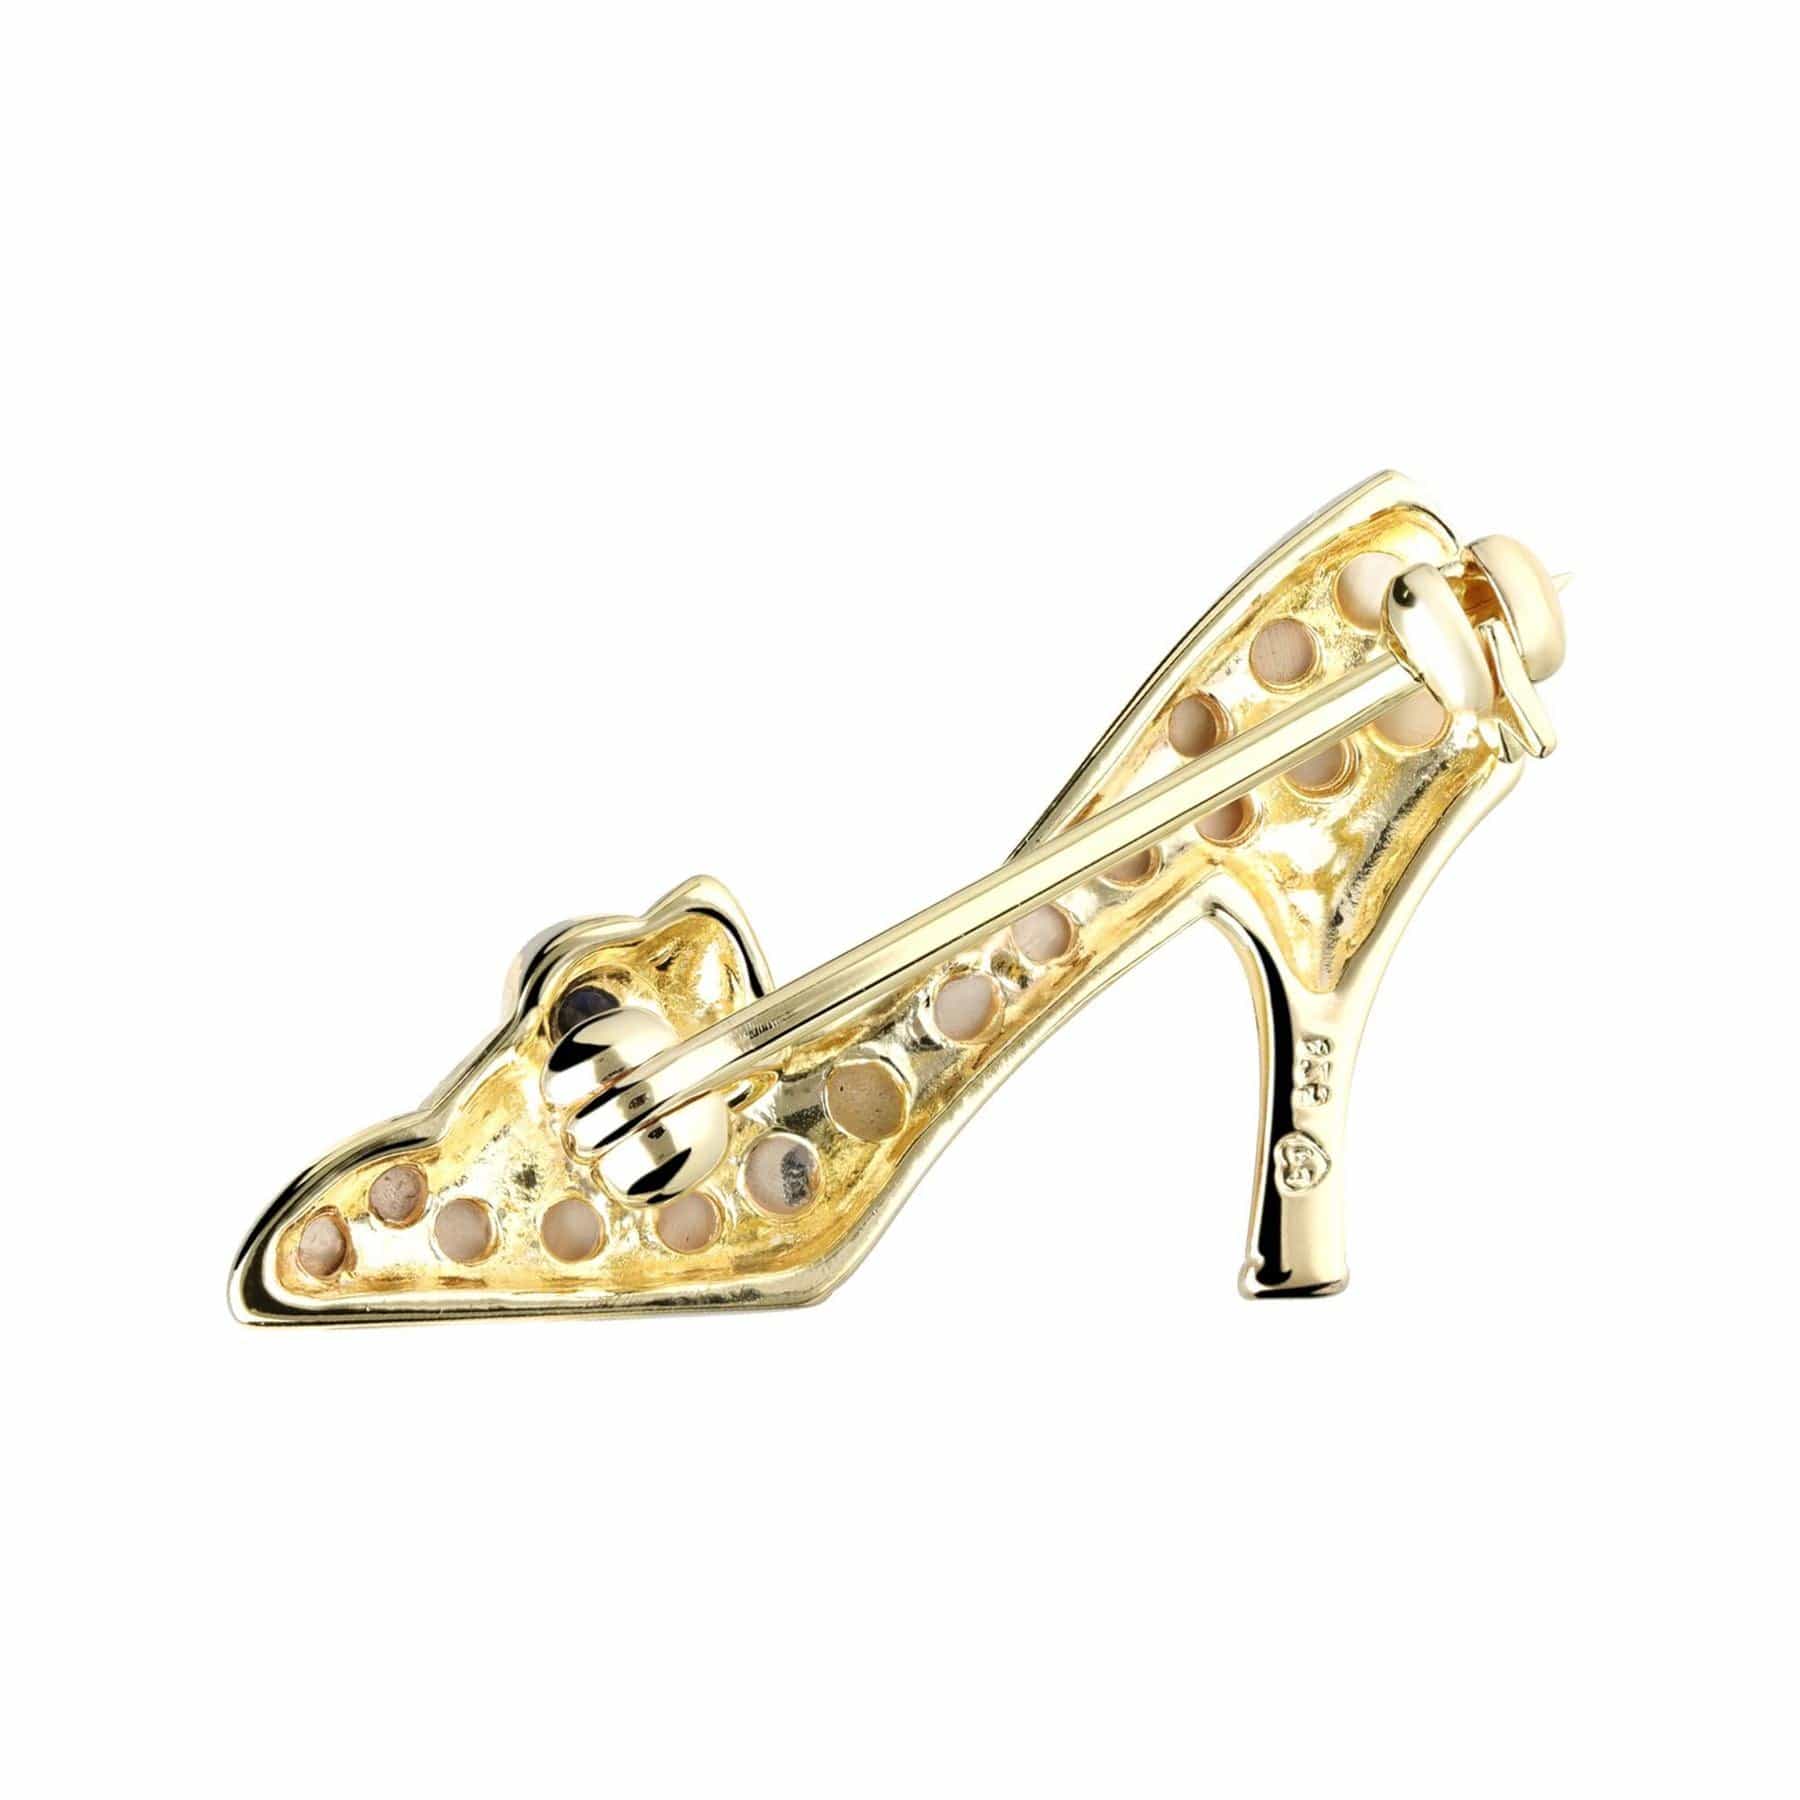 Sapphire & Marcasite Shoe Brooch in 18ct Gold Plated Silver - Gemondo